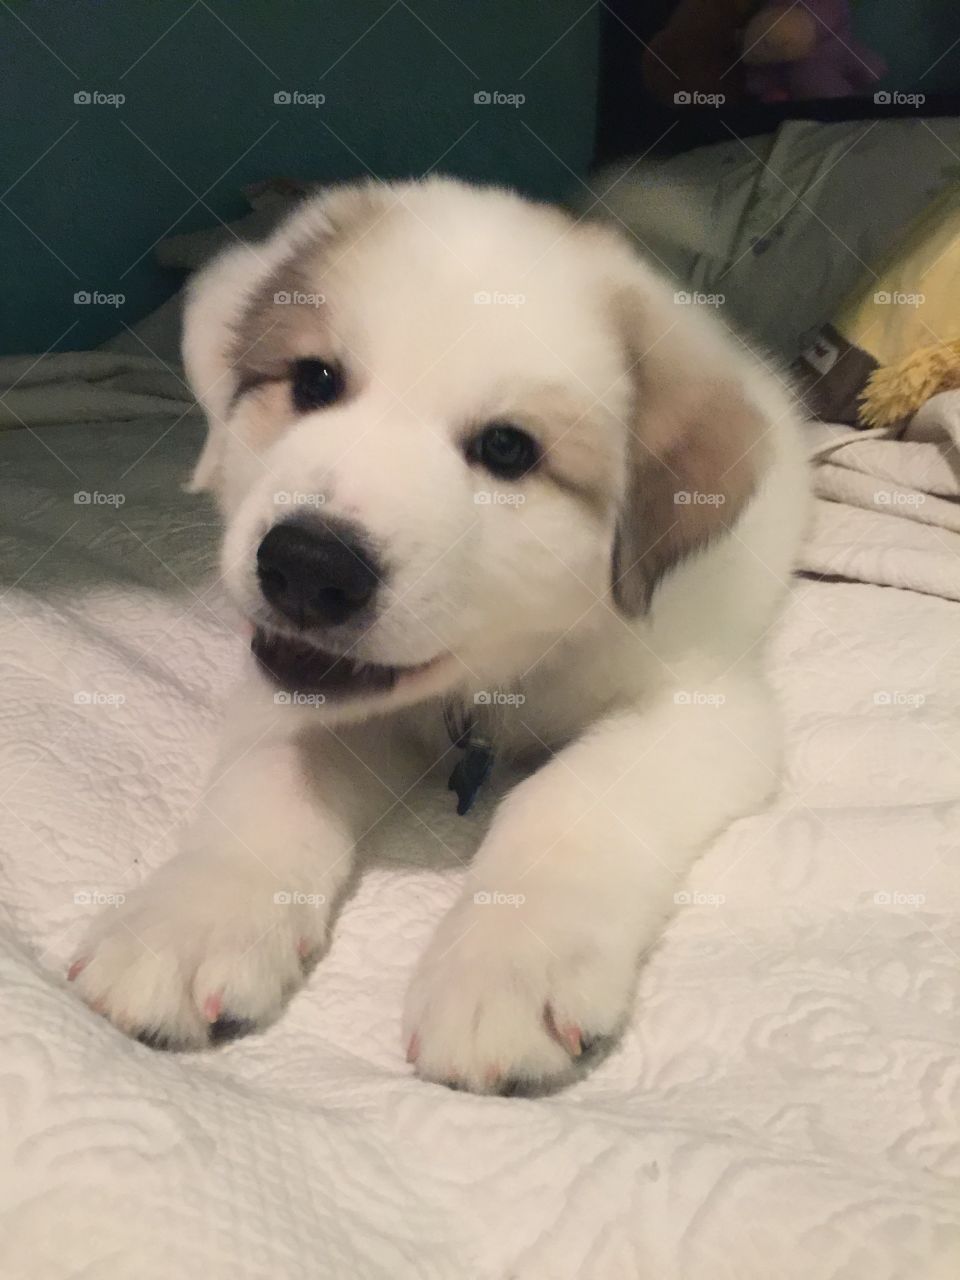 Great Pyrenees’s puppy